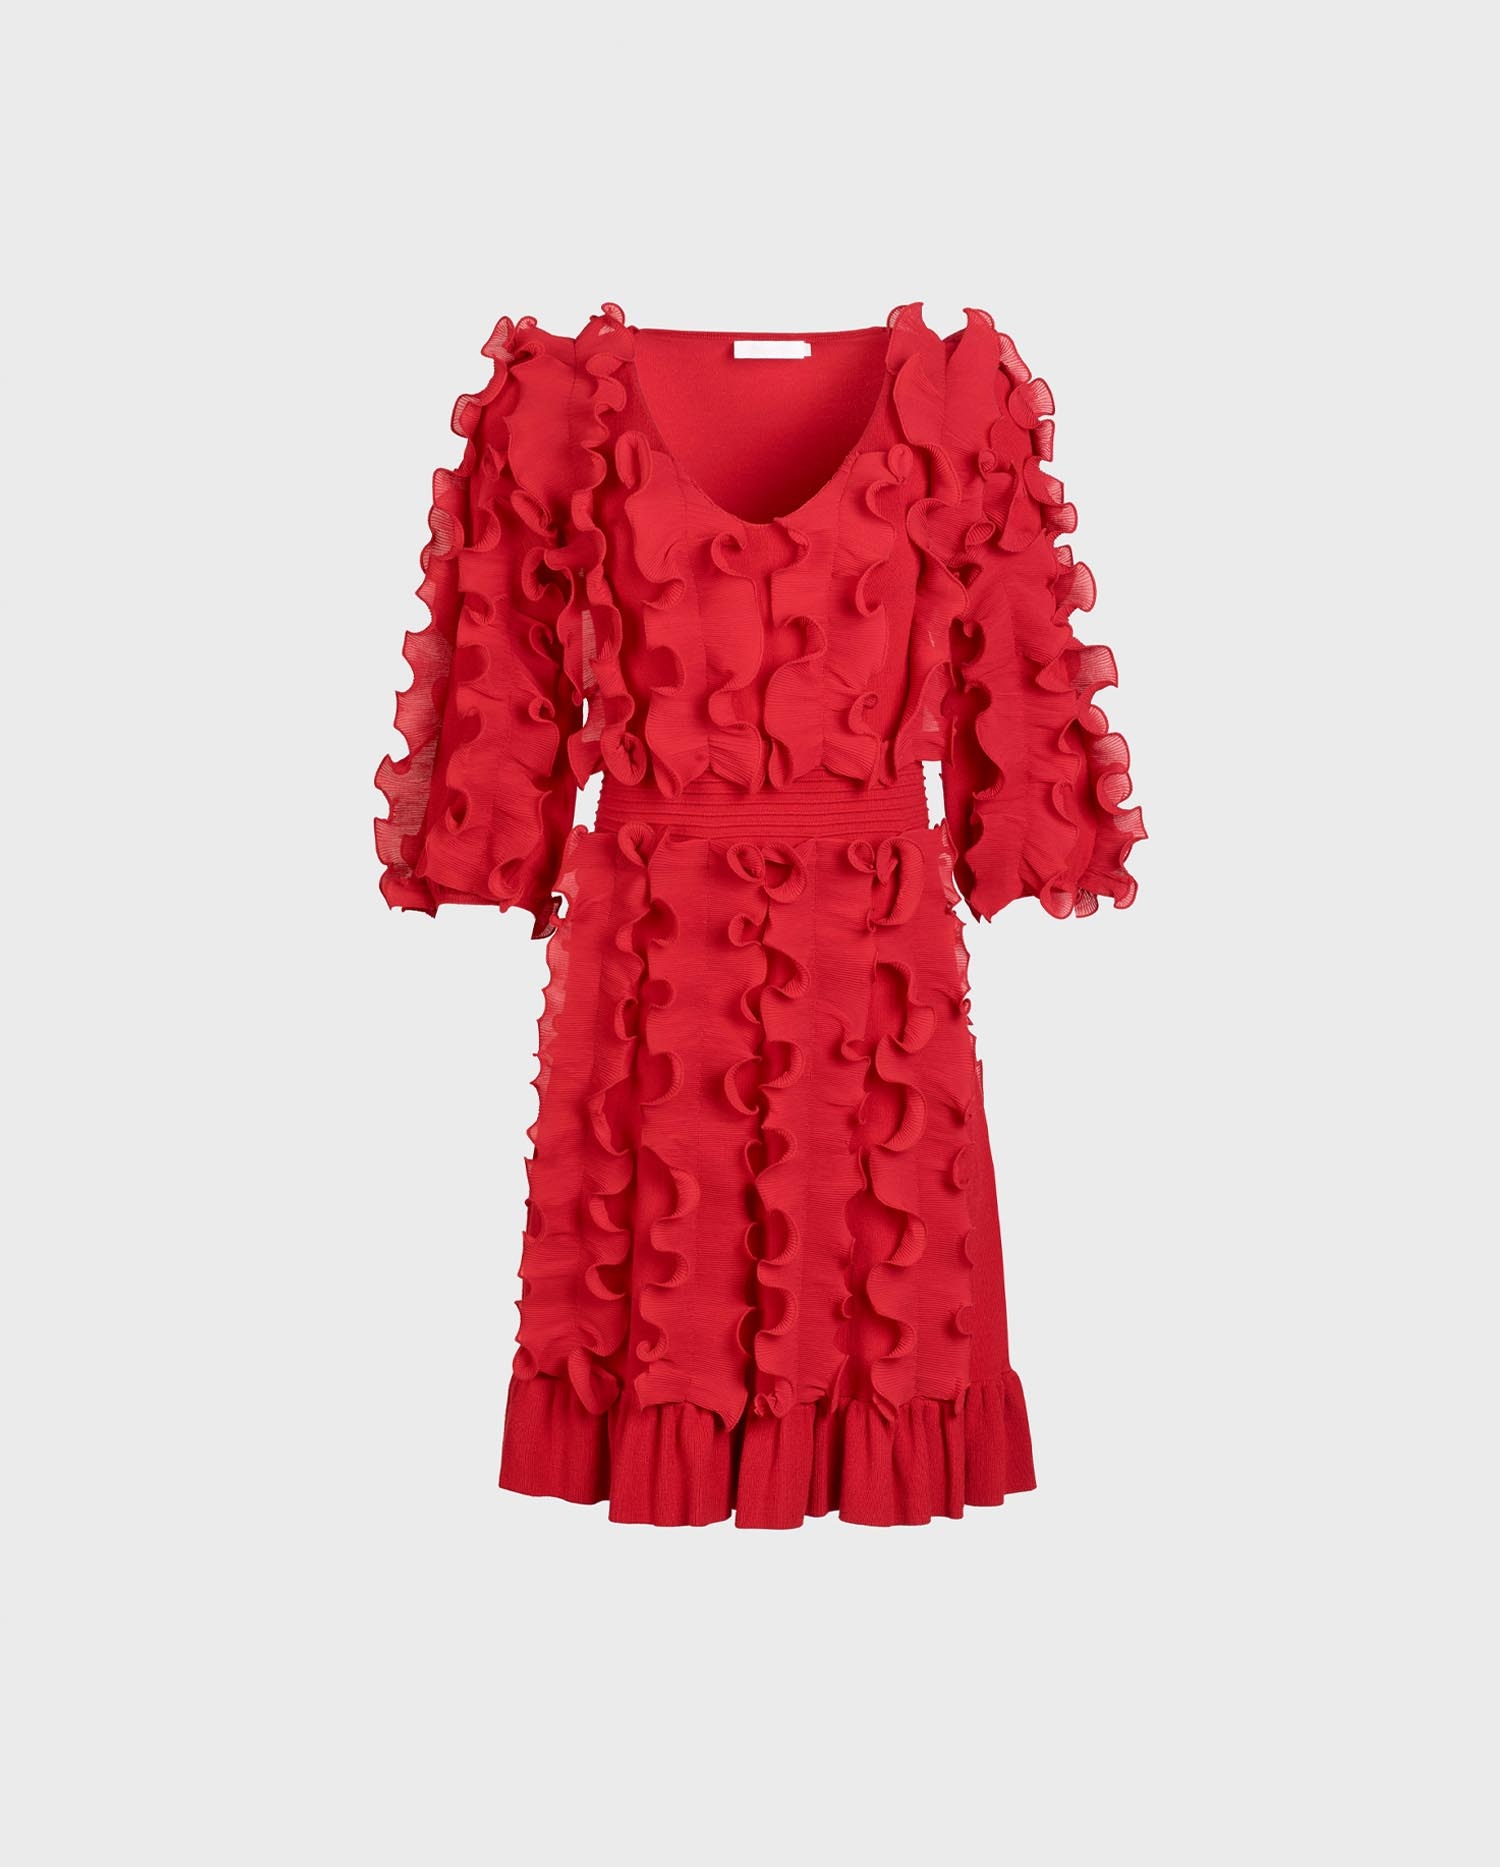 Explore the red ruffle PROSE DRESS from Parisian Designer Anne Fontaine